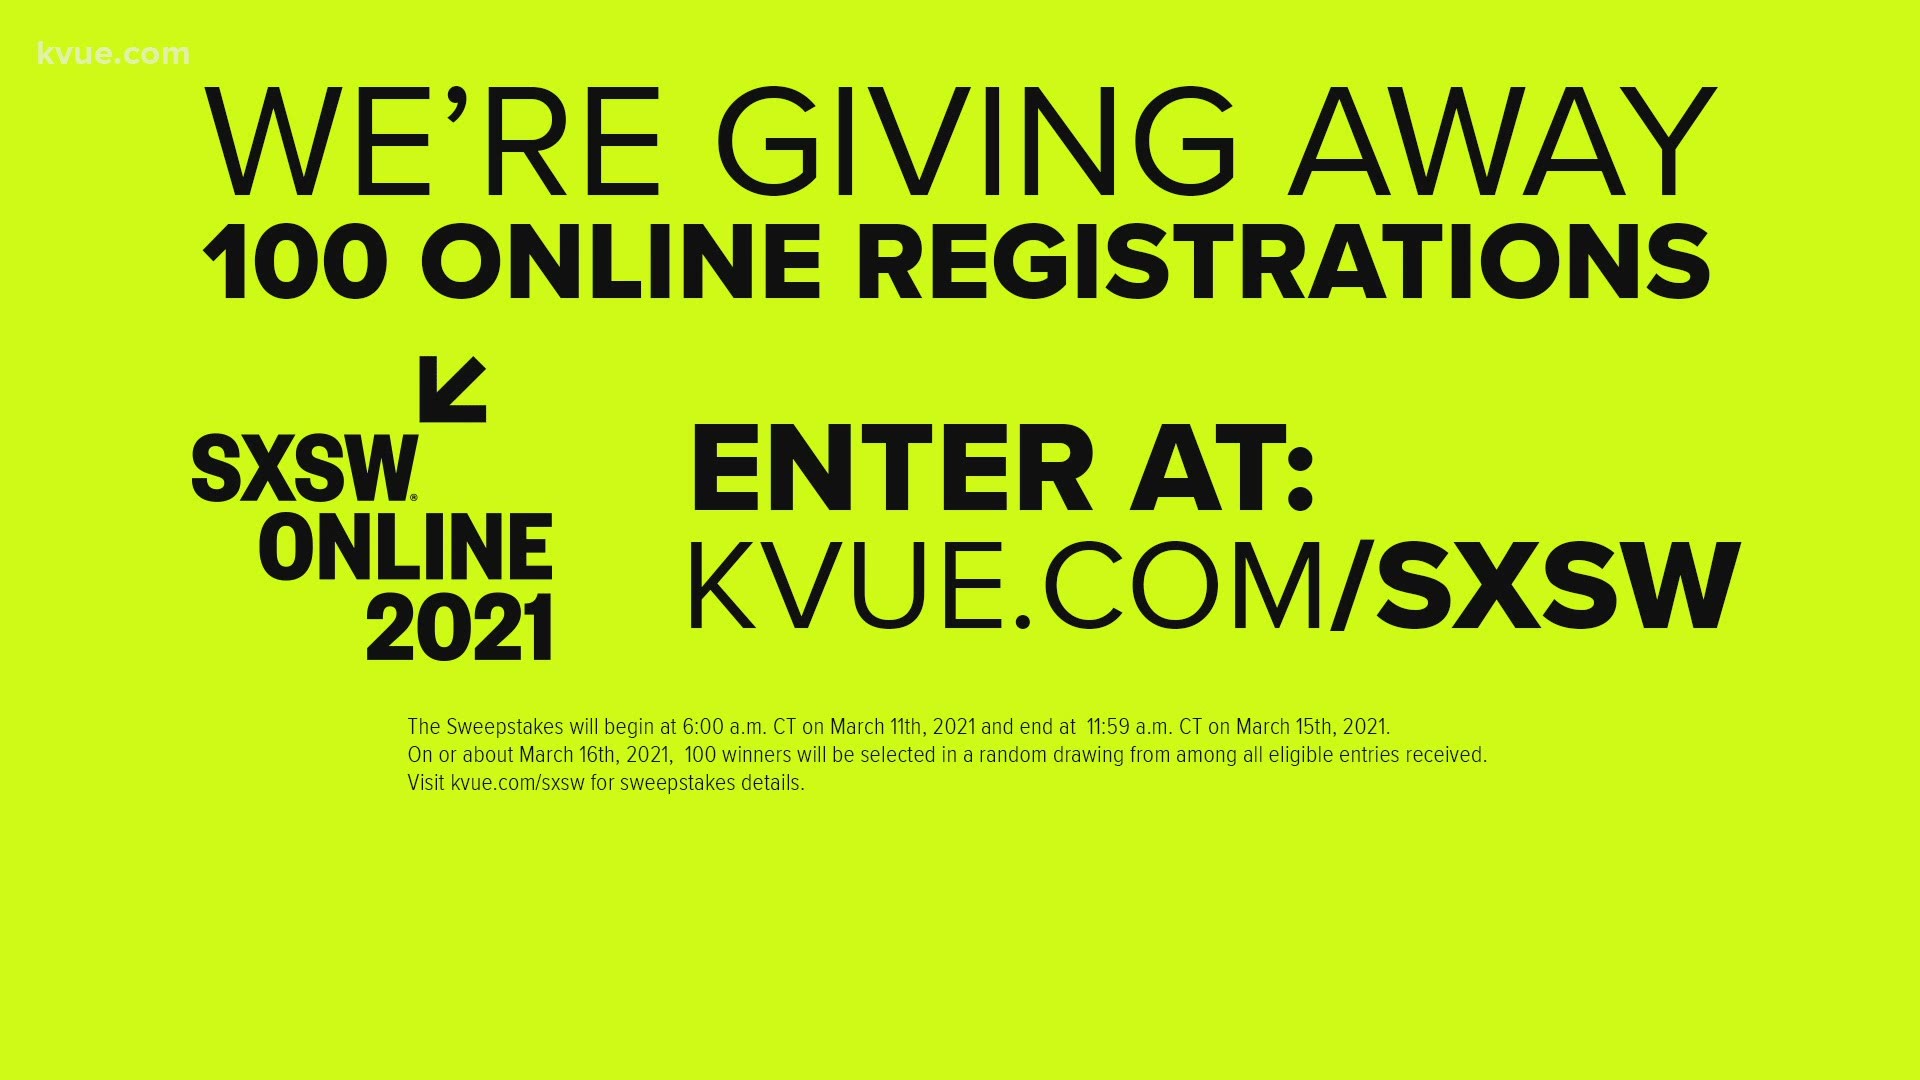 KVUE is teaming up with SXSW to give away 100 passes to this year's virtual festival.